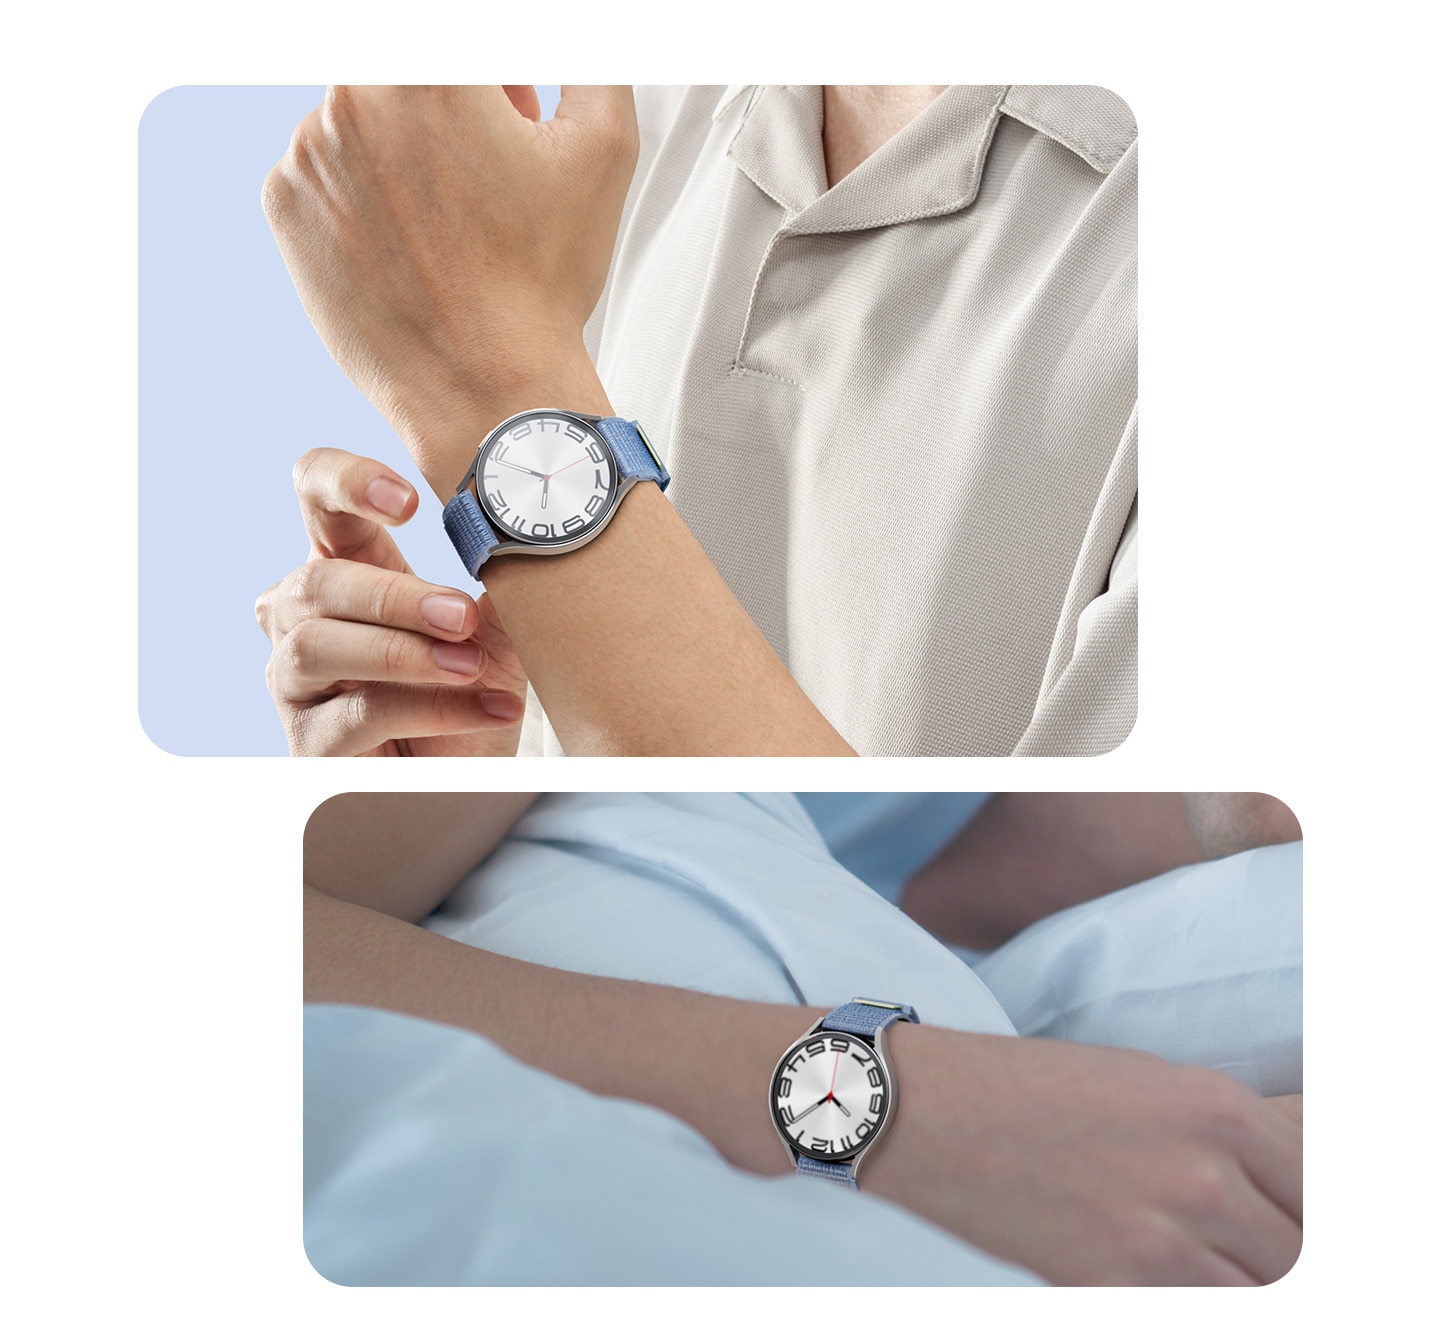 A person in a casual outfit is buckling up a wide Fabric Band attached to a Galaxy Watch6 device. A person is lying snug in bed while wearing a Galaxy Watch6 strapped with a wide Fabric Band.